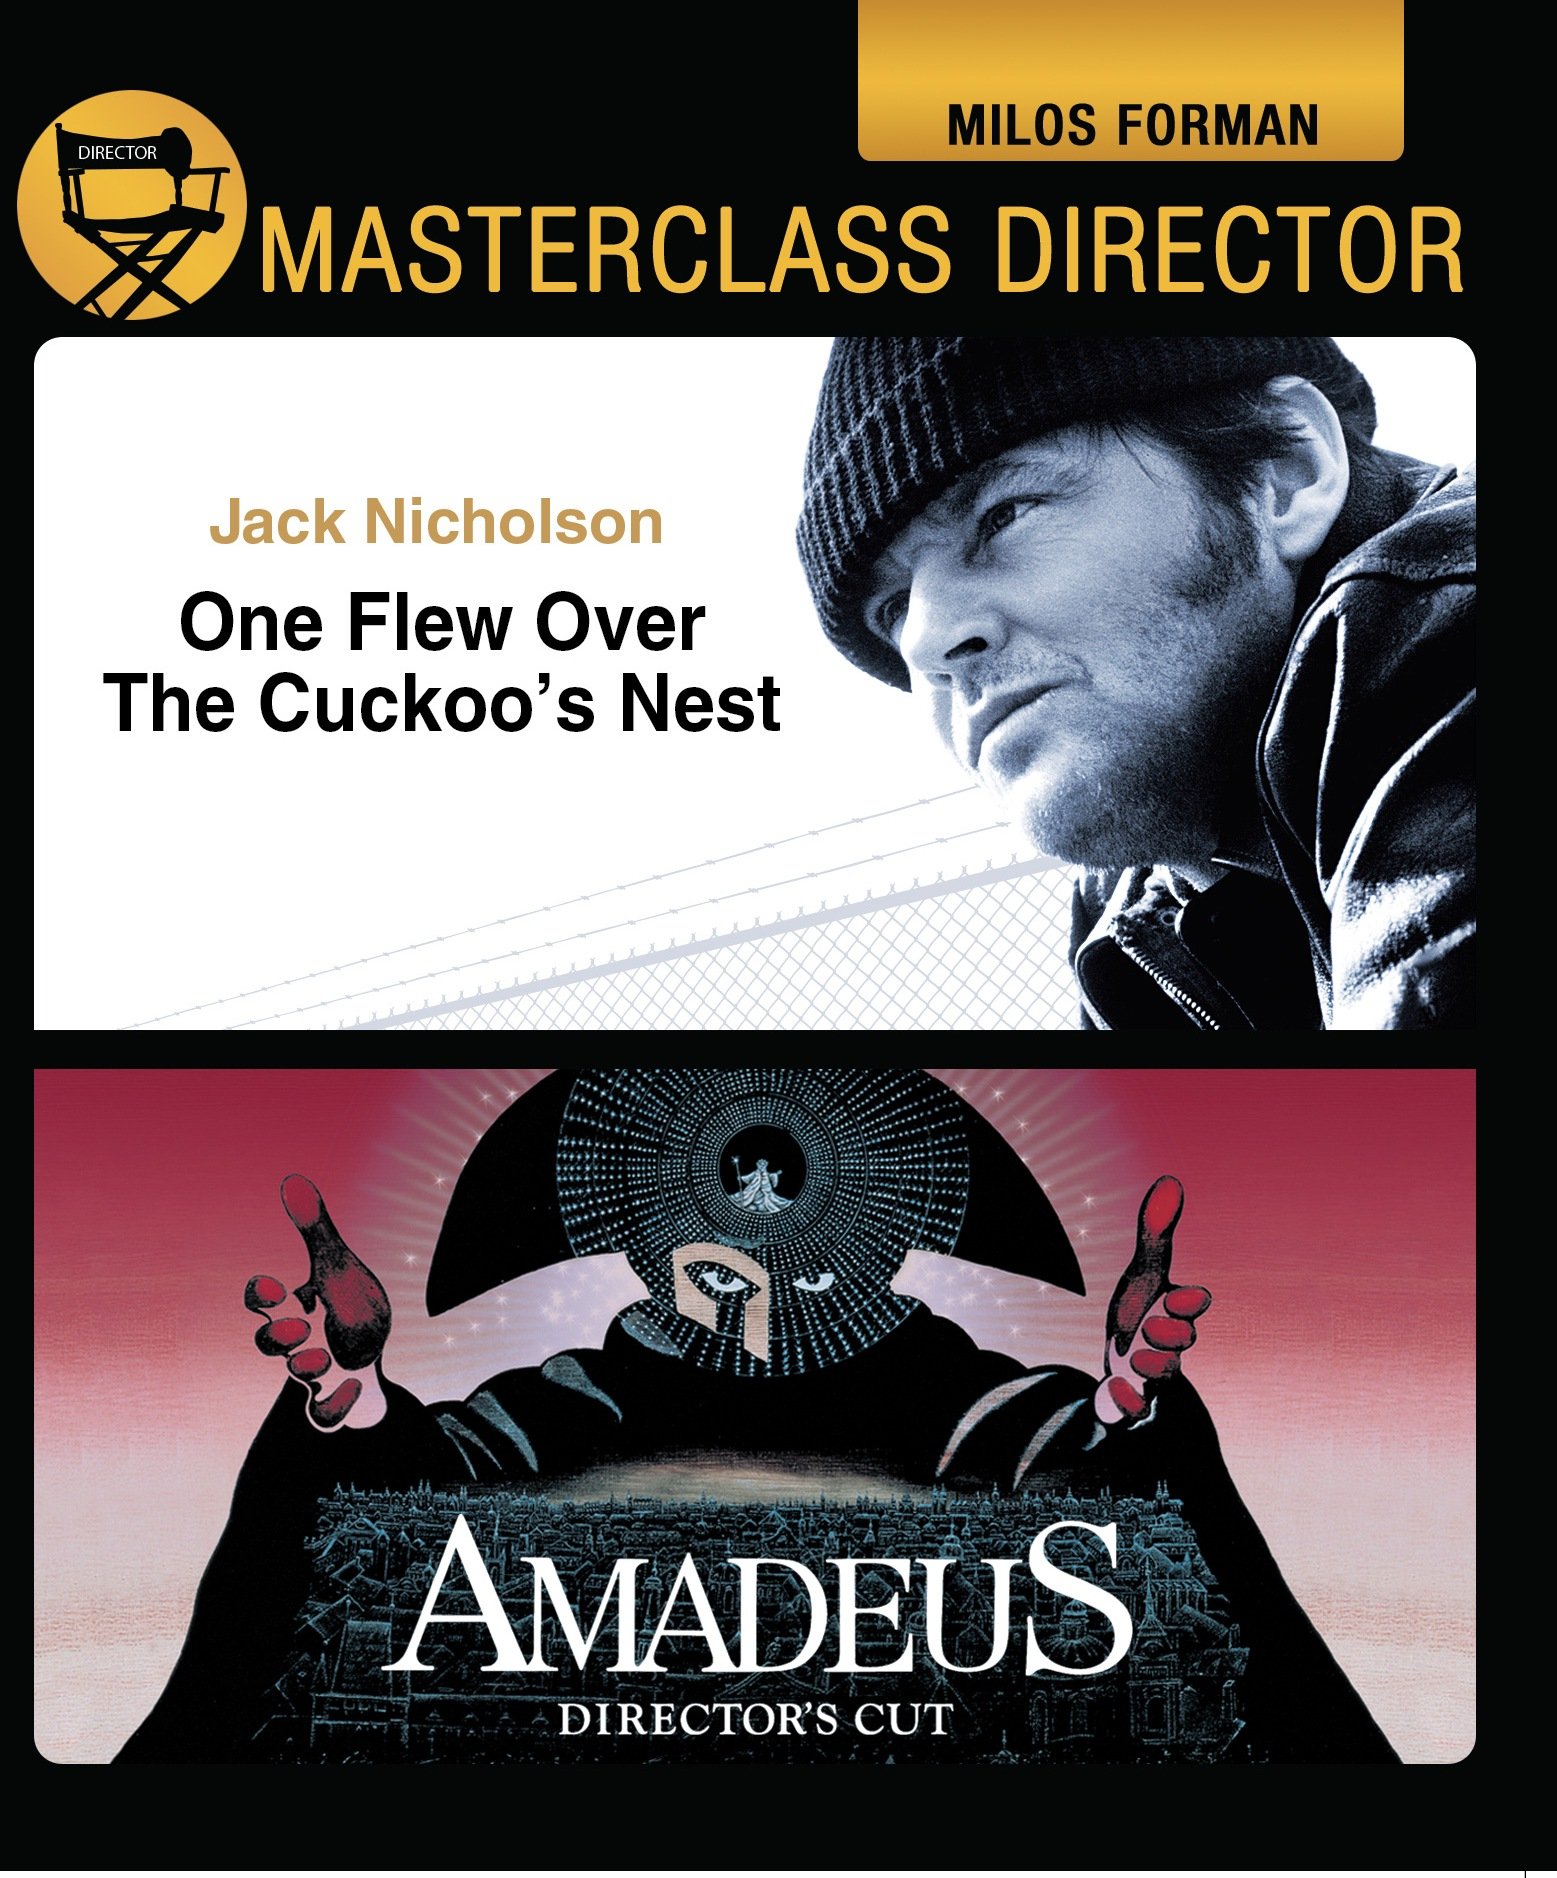 master-class-director-milos-forman-amadeus-and-one-flew-over-the-cuckoos-nest